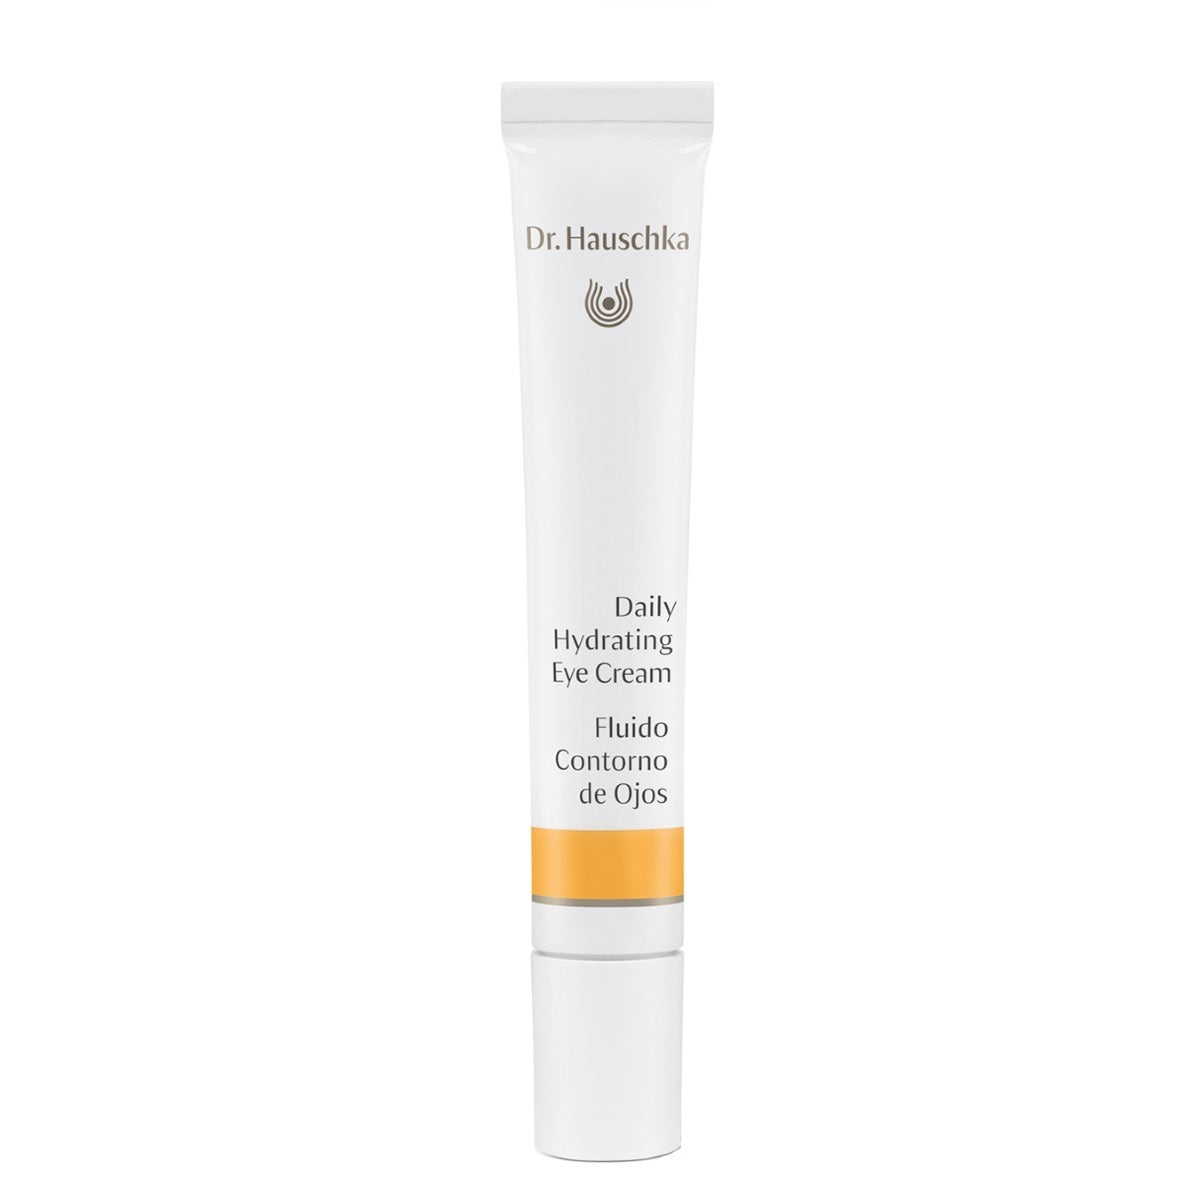 Primary image of Daily Hydrating Eye Cream